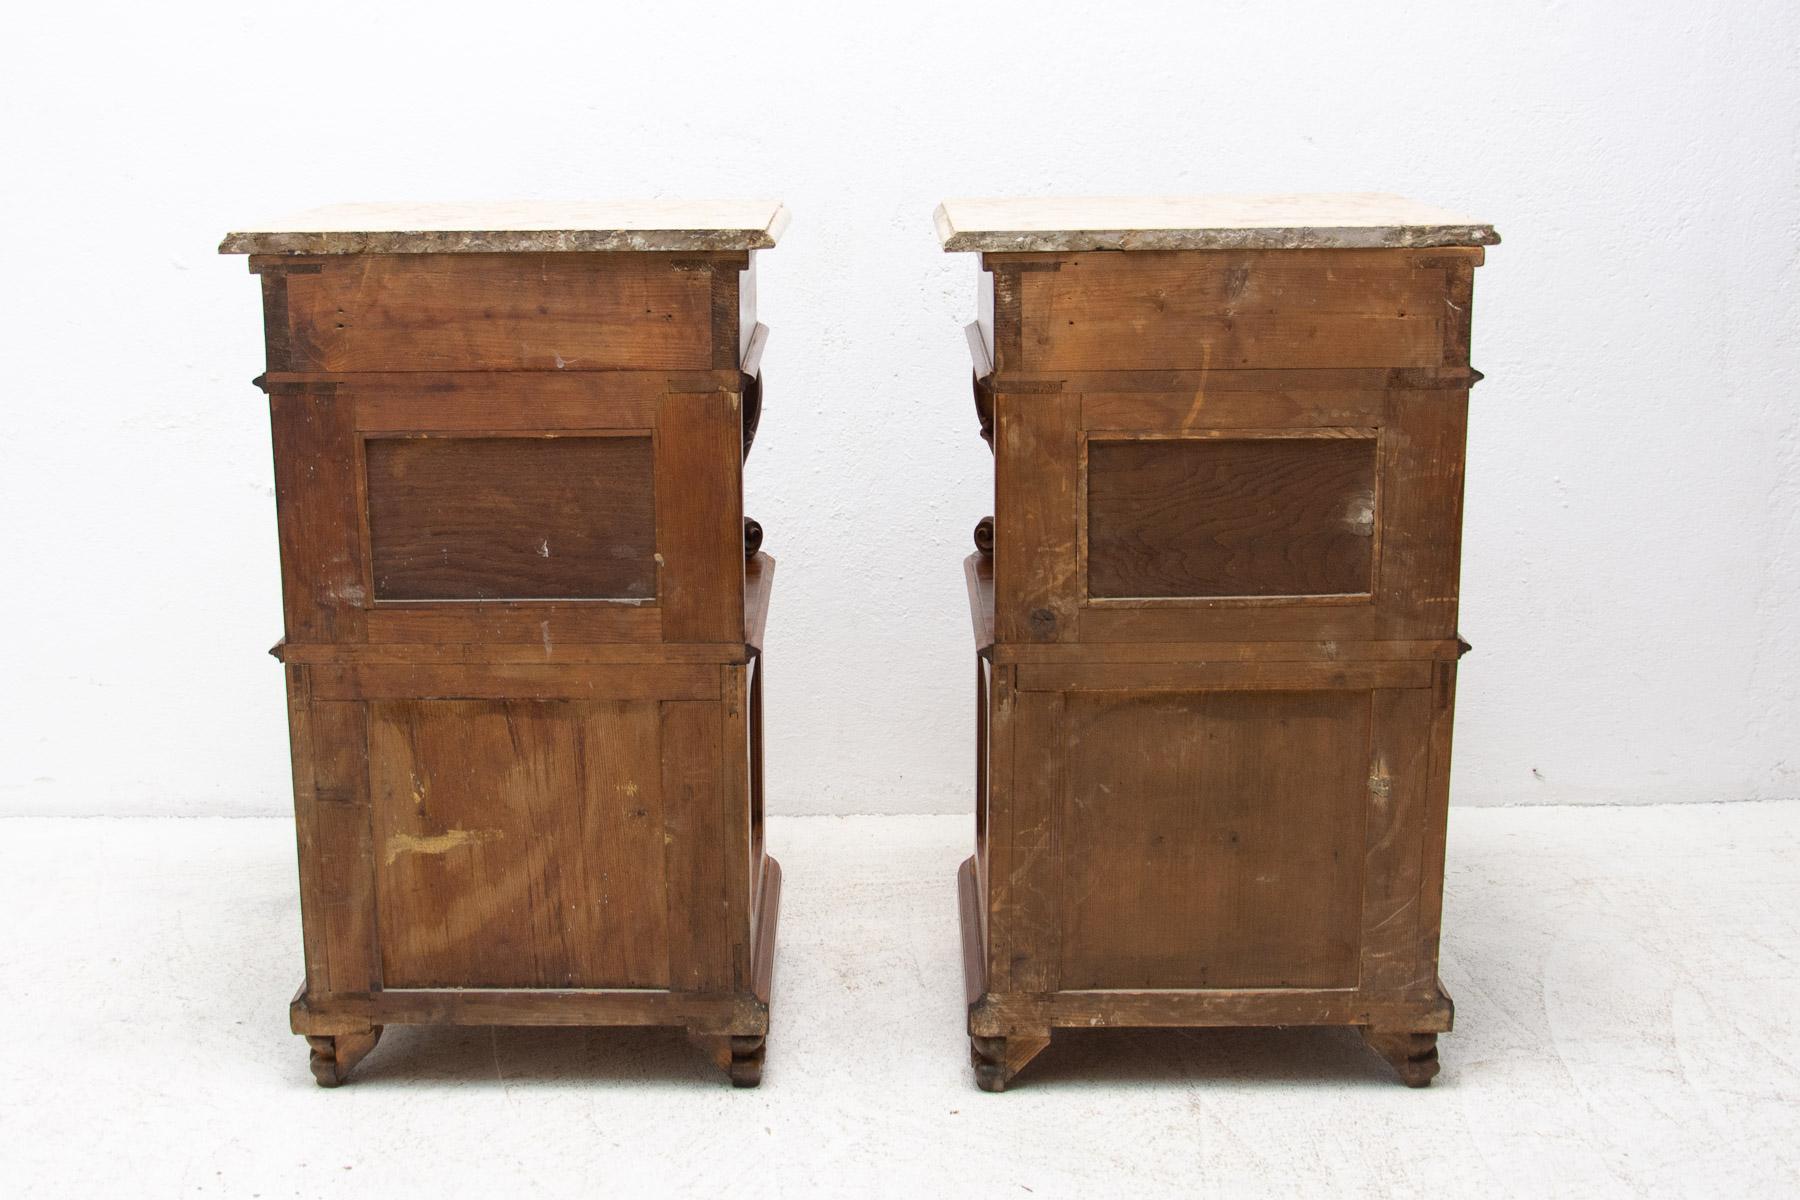 Pair of Fully Restored Historicist Bedside Tables, 1910, Austria For Sale 12